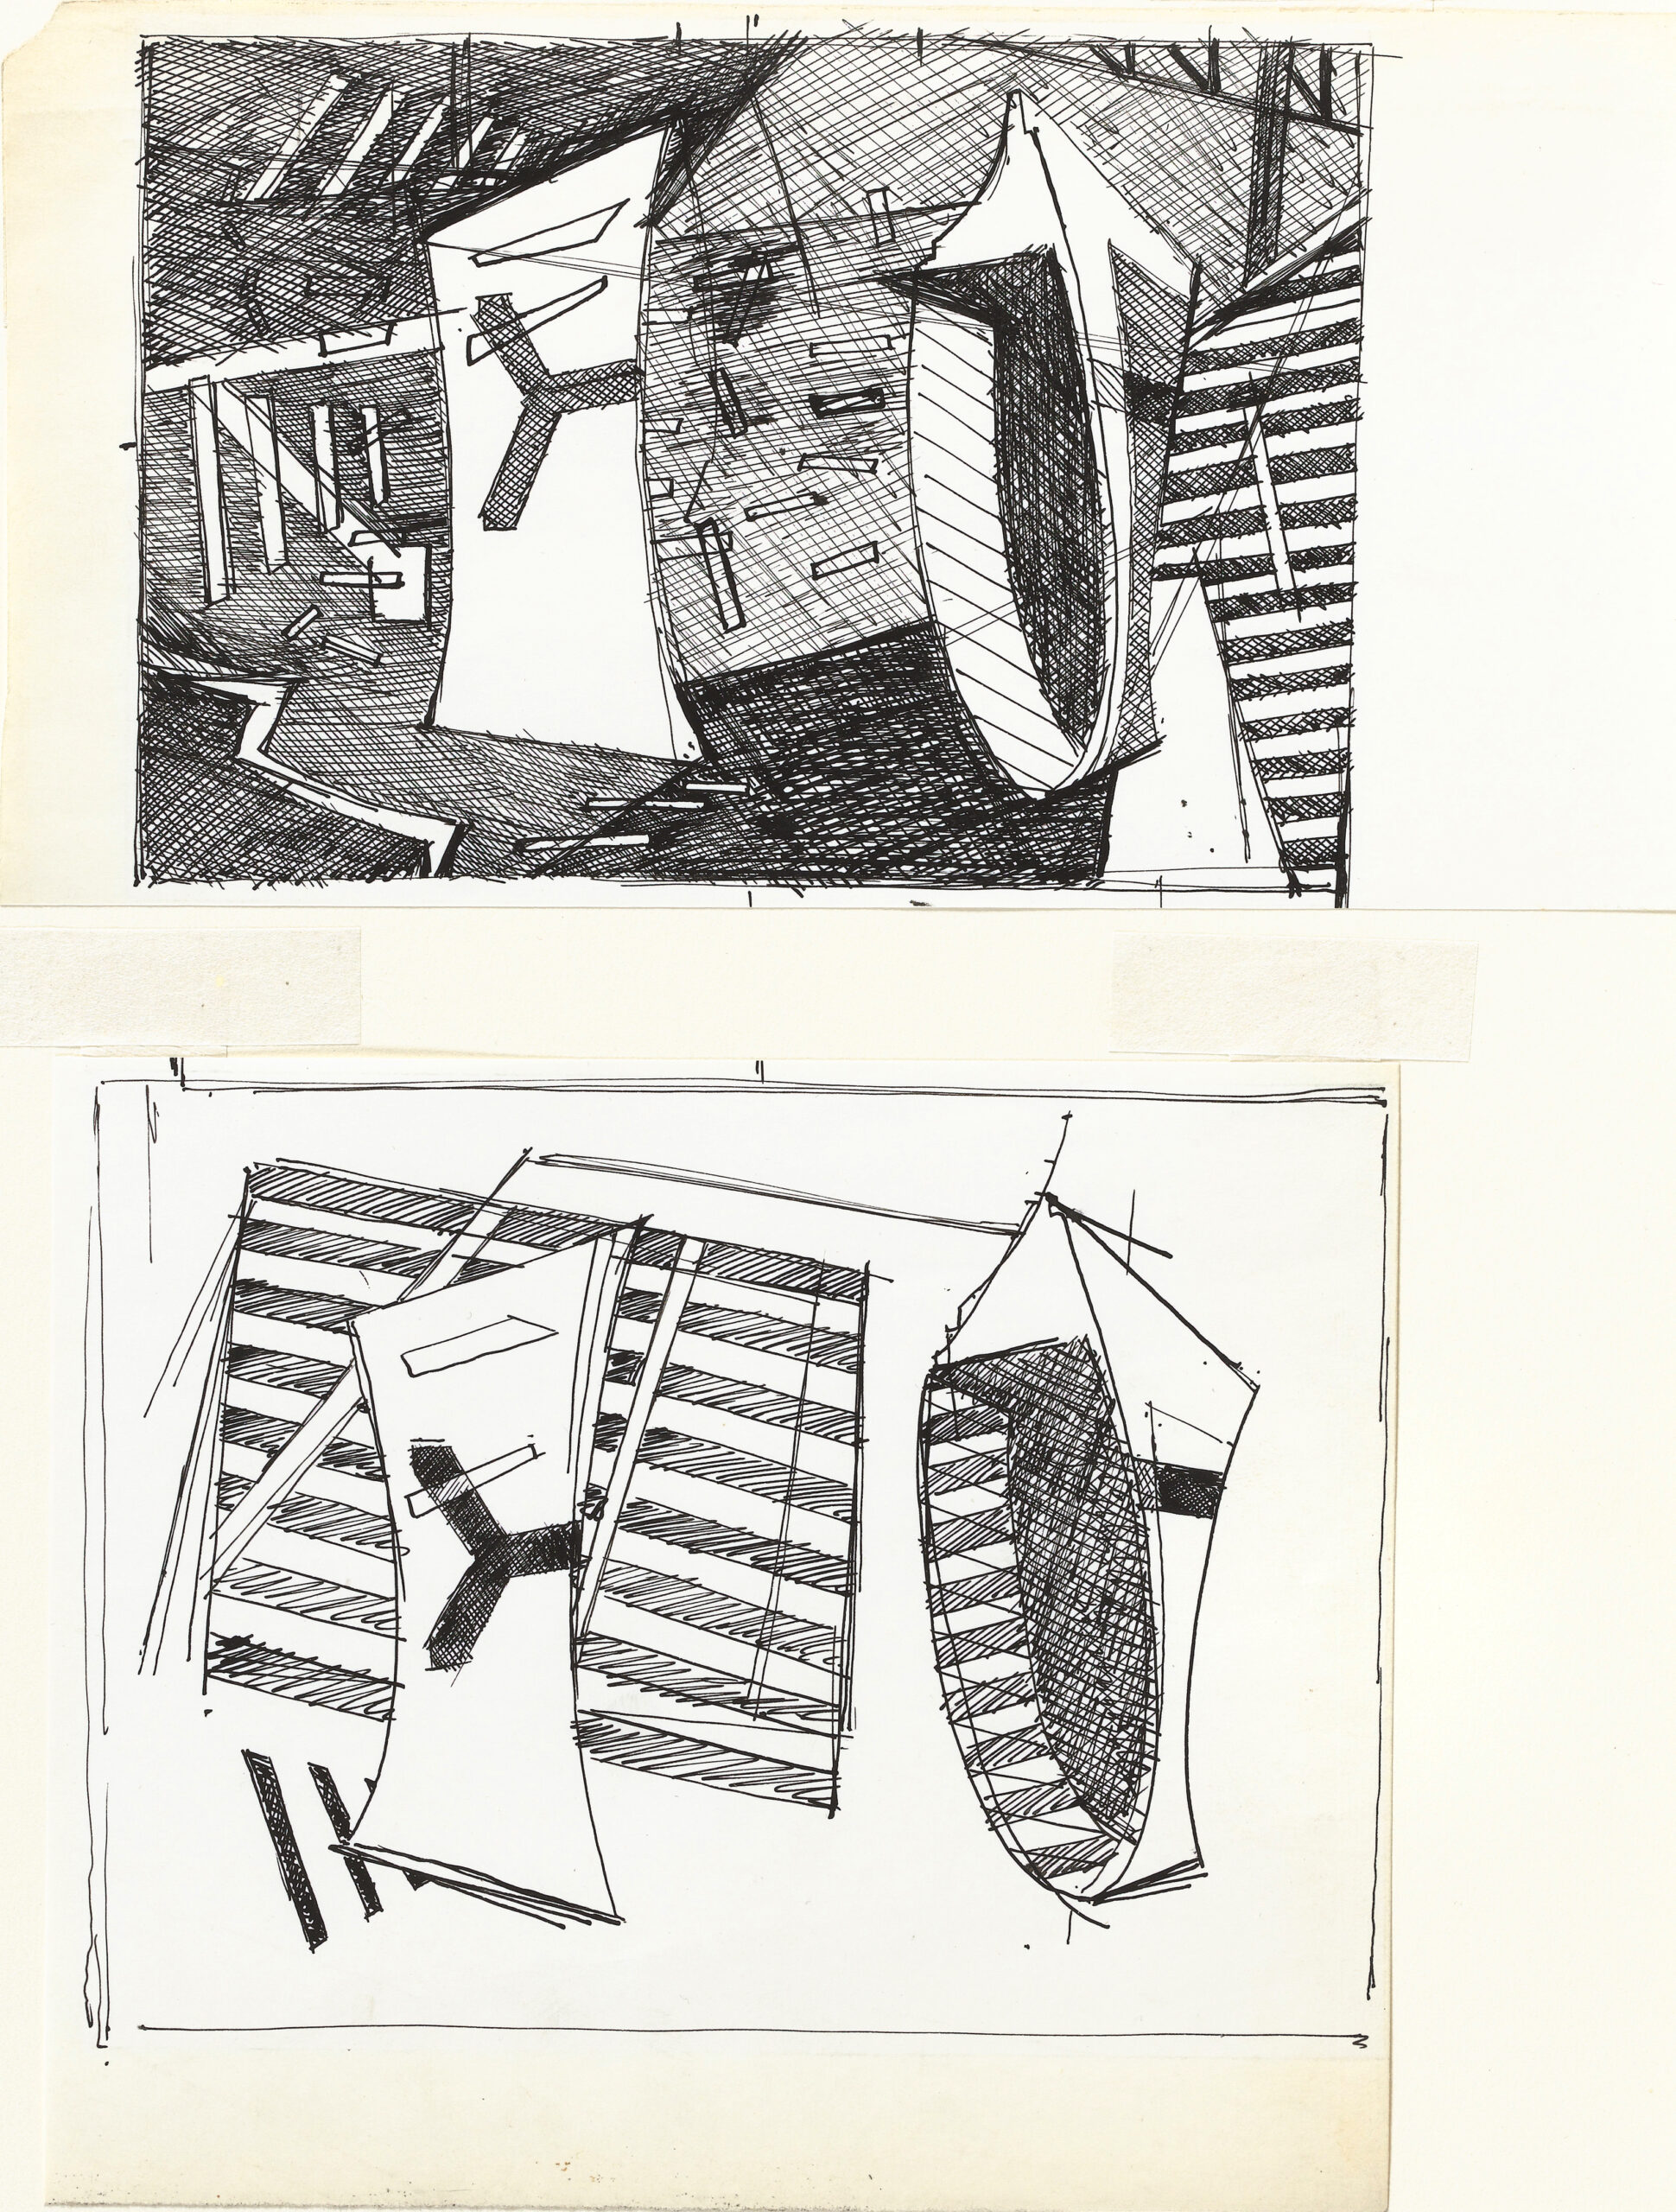 Two abstracted ink studies of fixtures and parts in an aircraft factory with cross-hatching and geometric and architectural shapes.